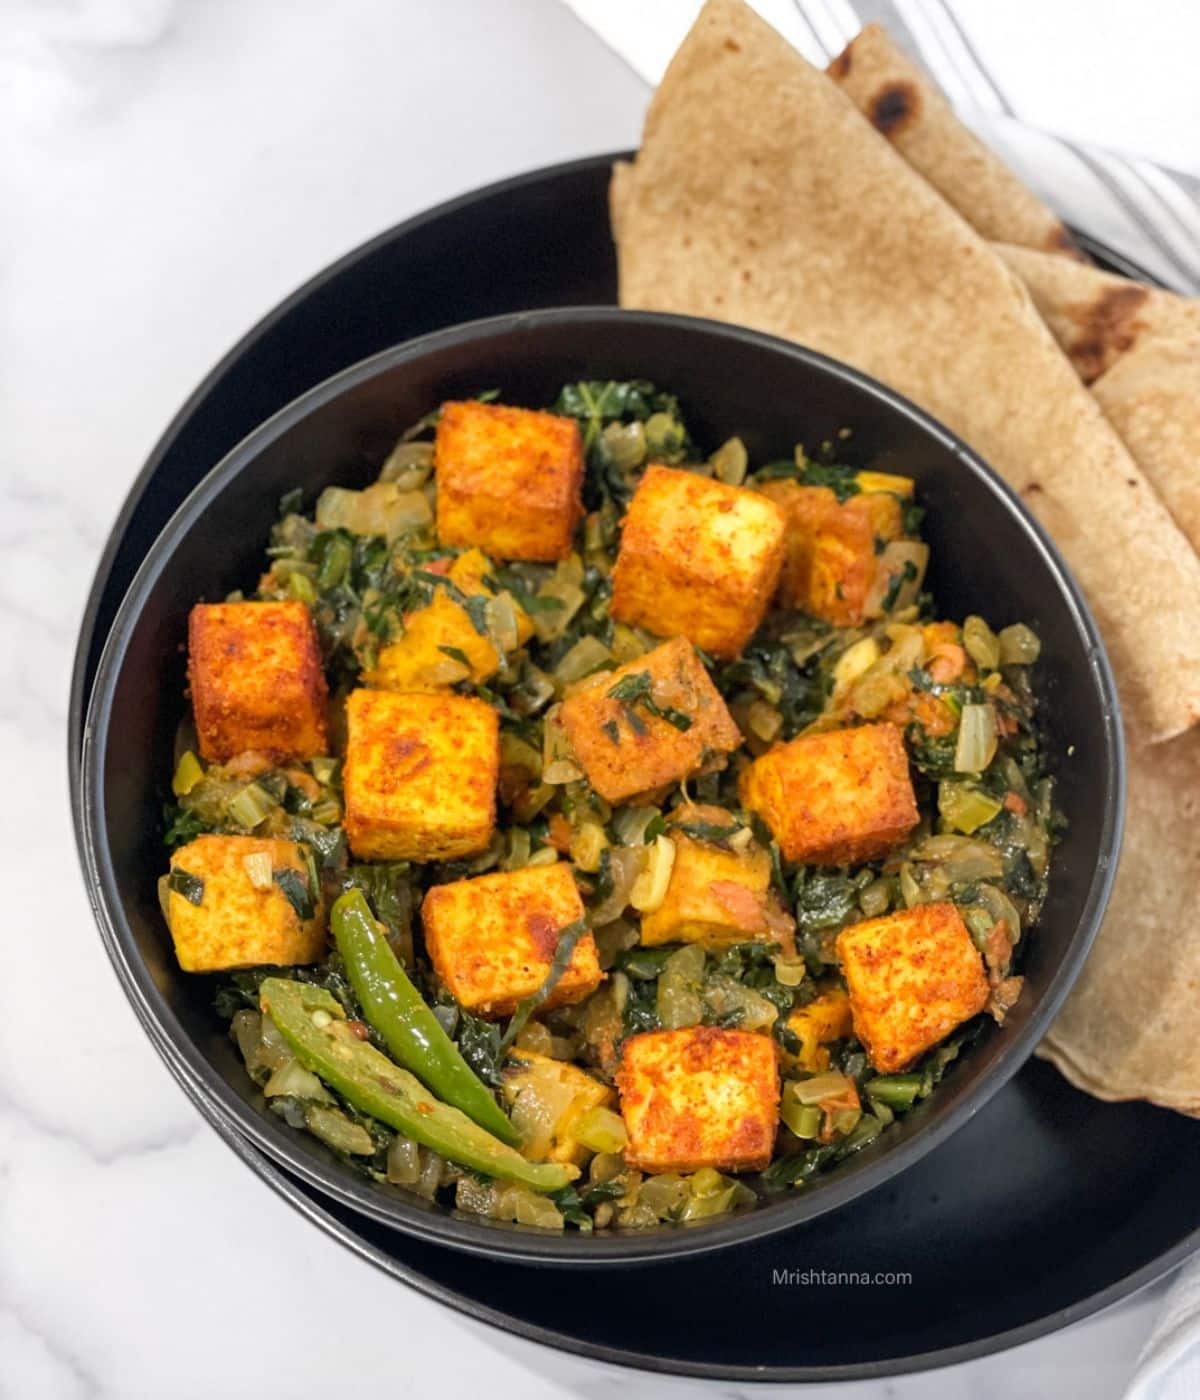 A plate is with chapati and bowl of vegan saag paneer on the table.